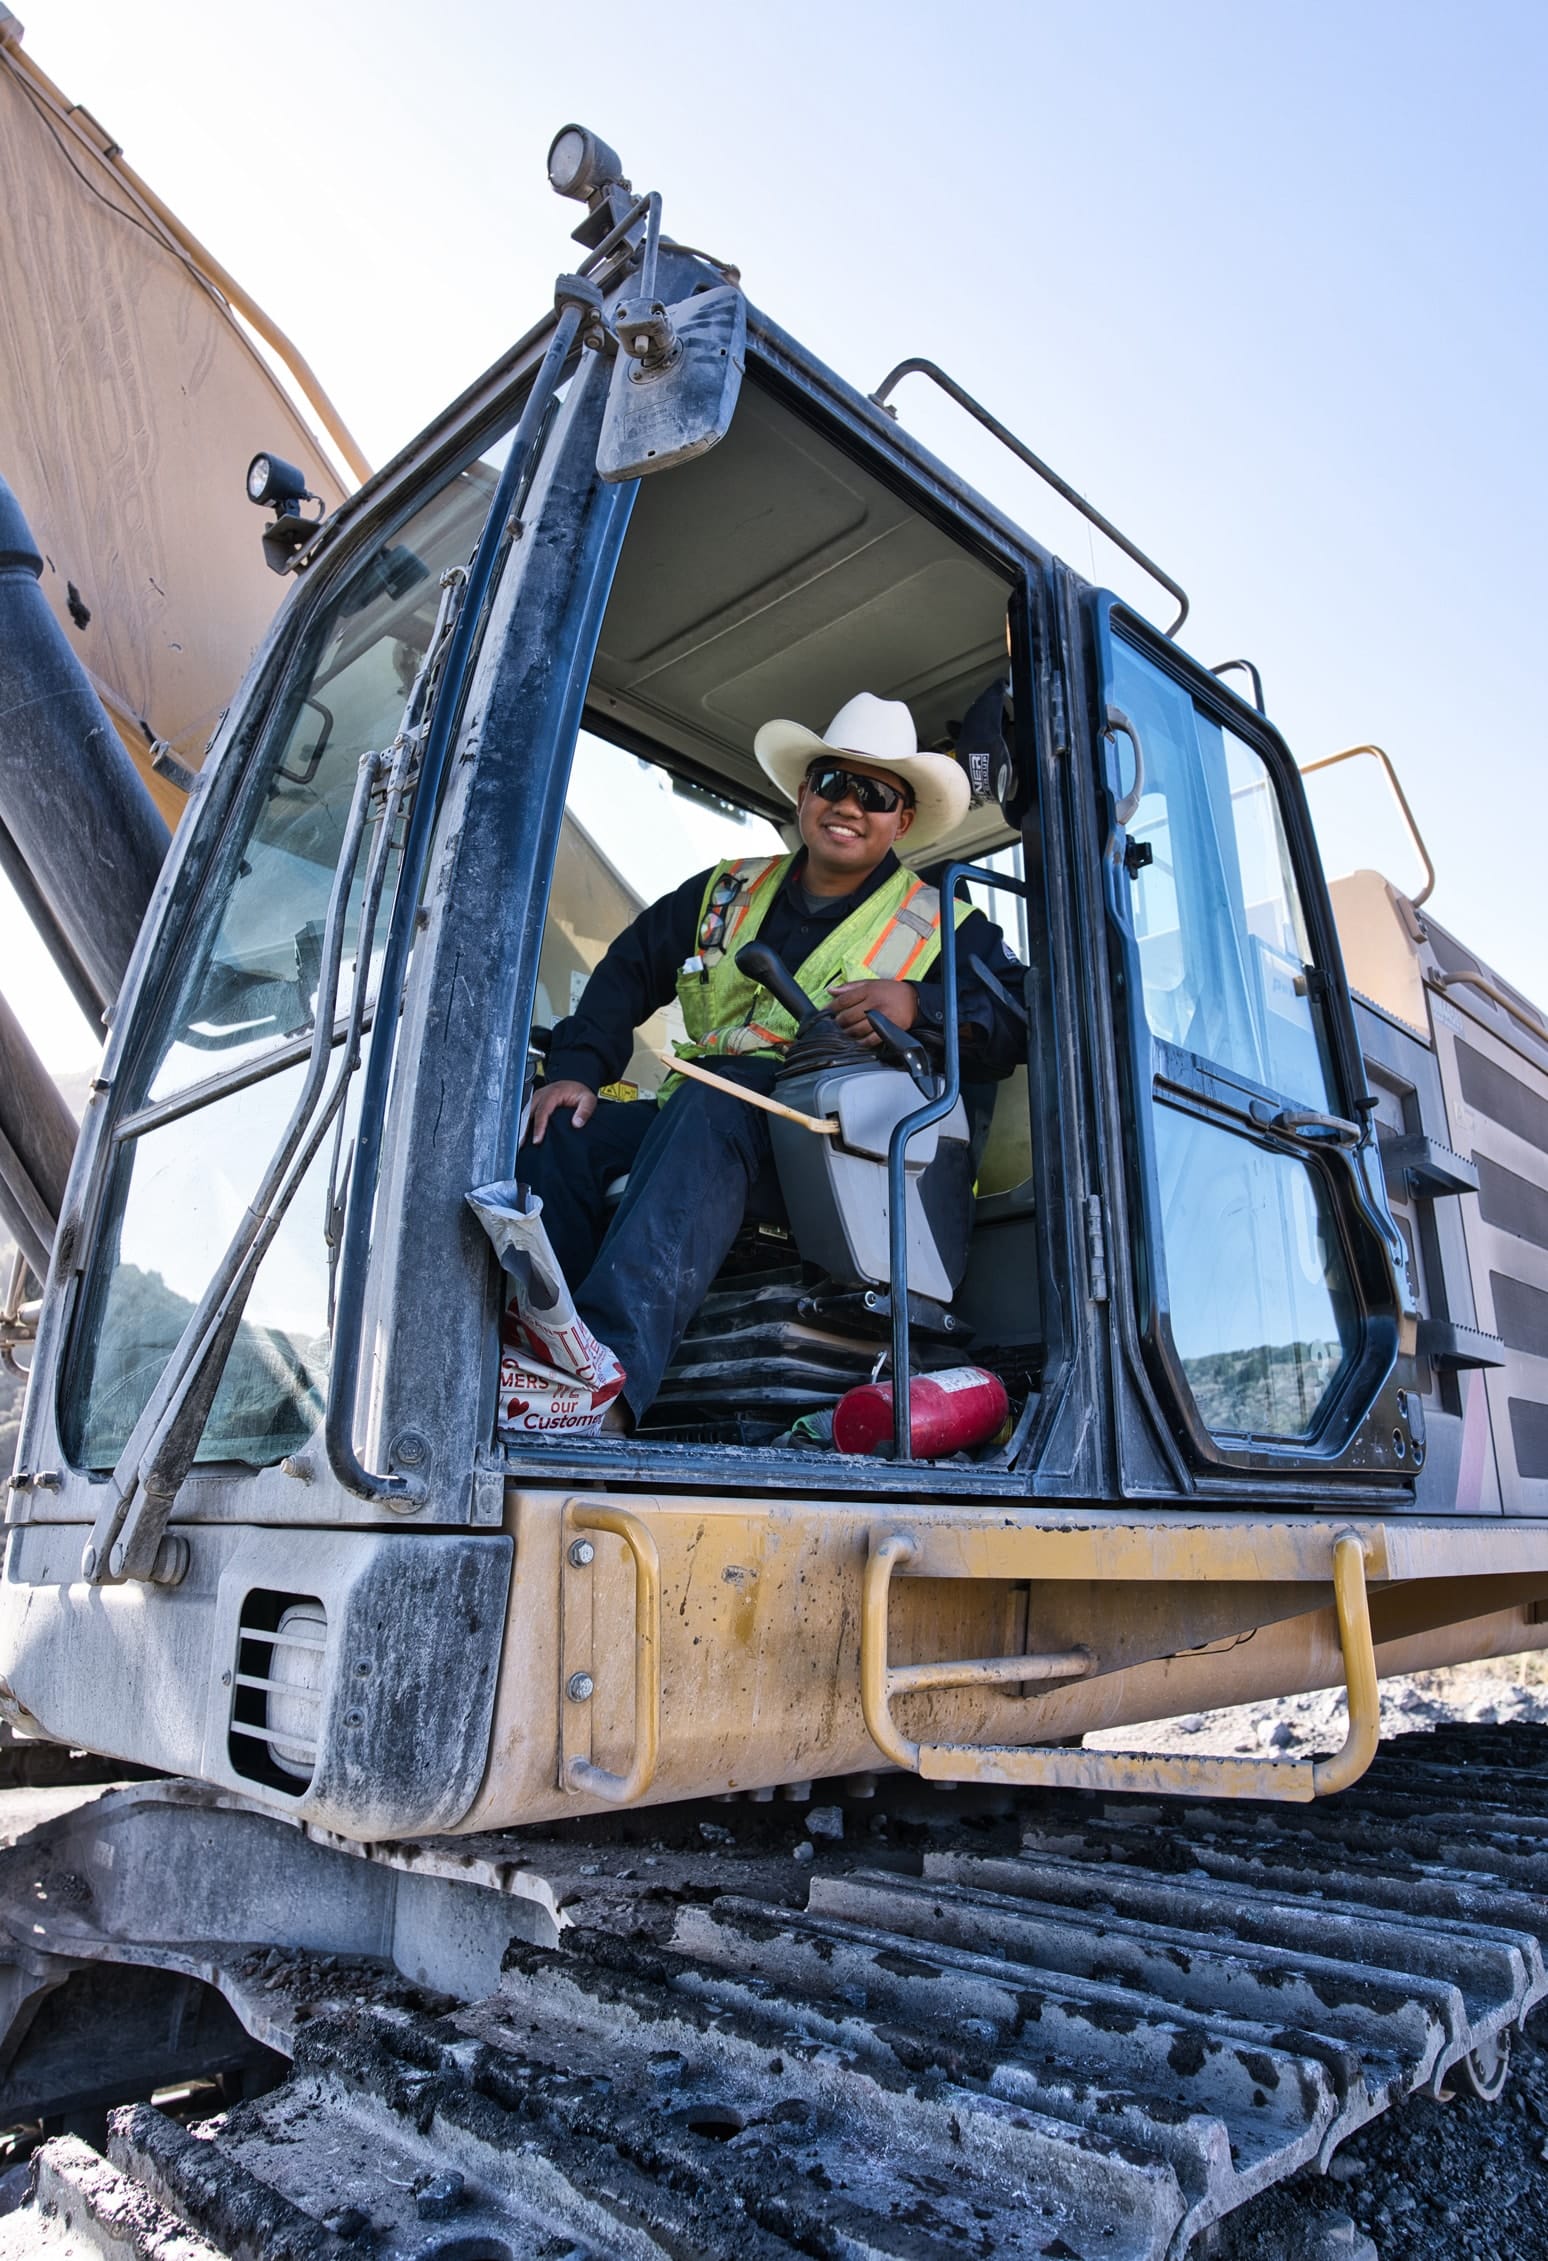 Smiling construction worker sitting in cab of excavator